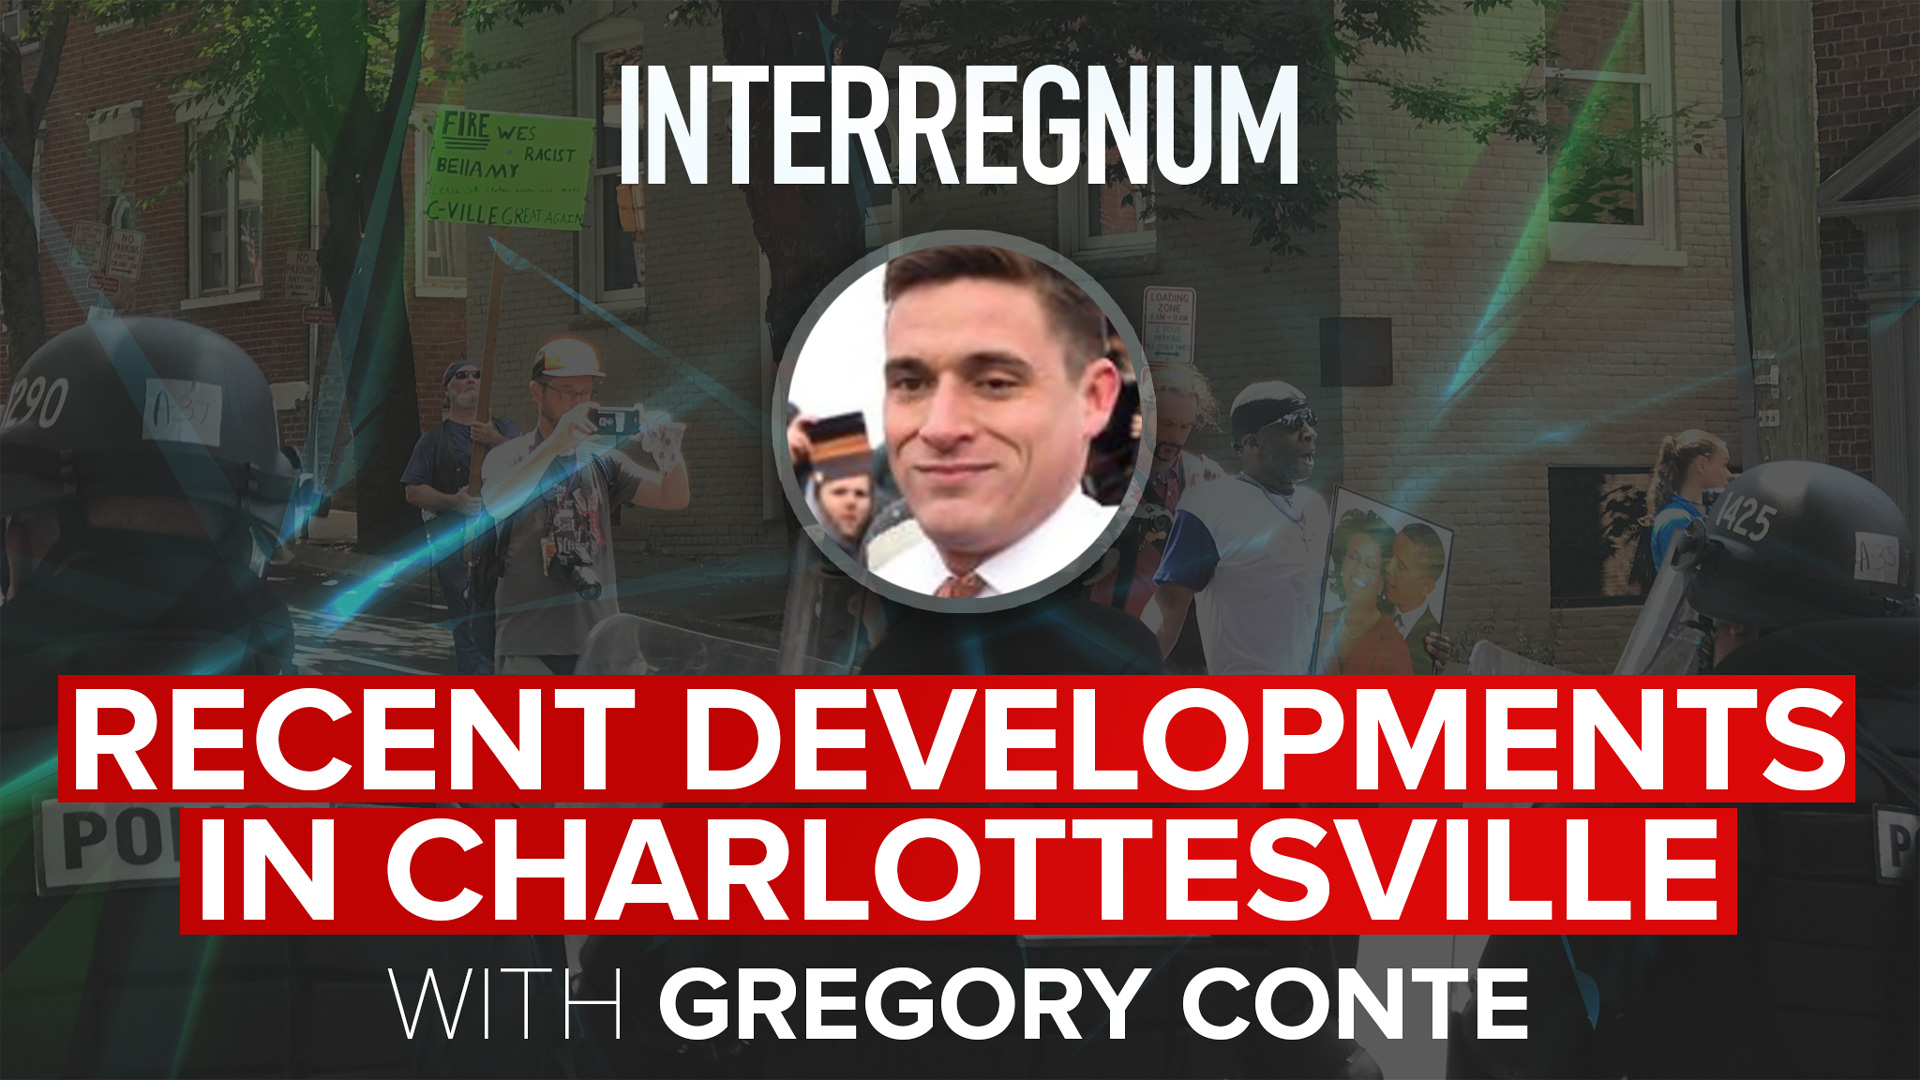 Recent Developments in Charlottesville with Gregory Conte